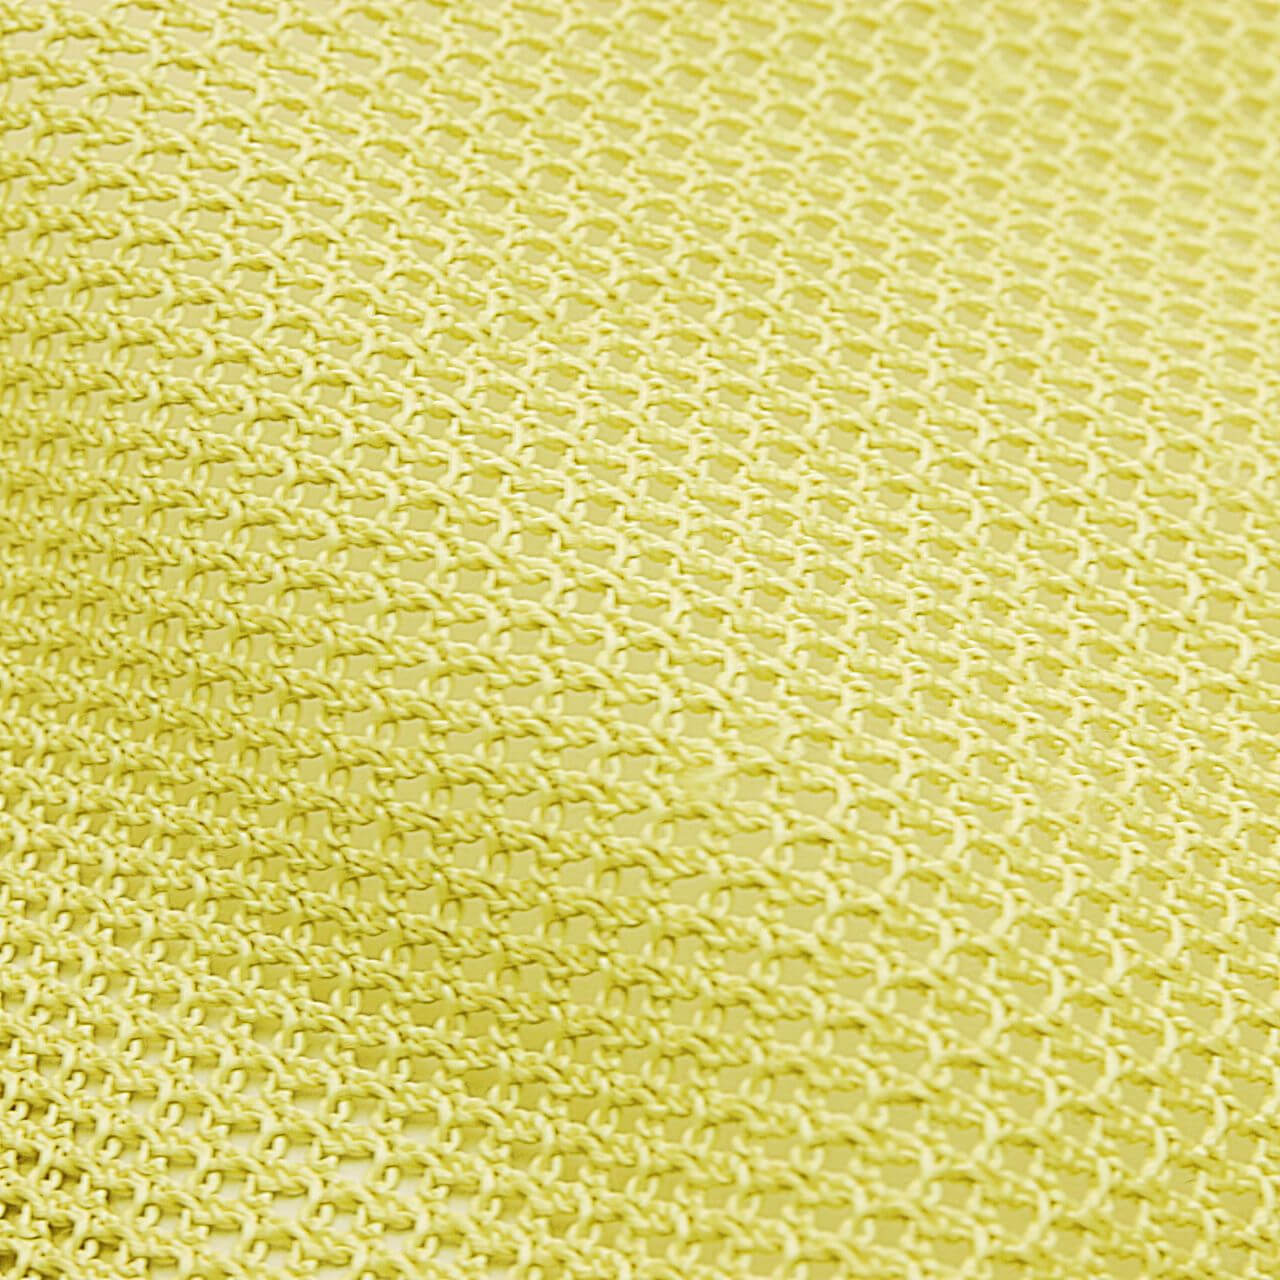 Stretchable Abrasion Resistant Fabric Made with Kevlar® - Kevlar